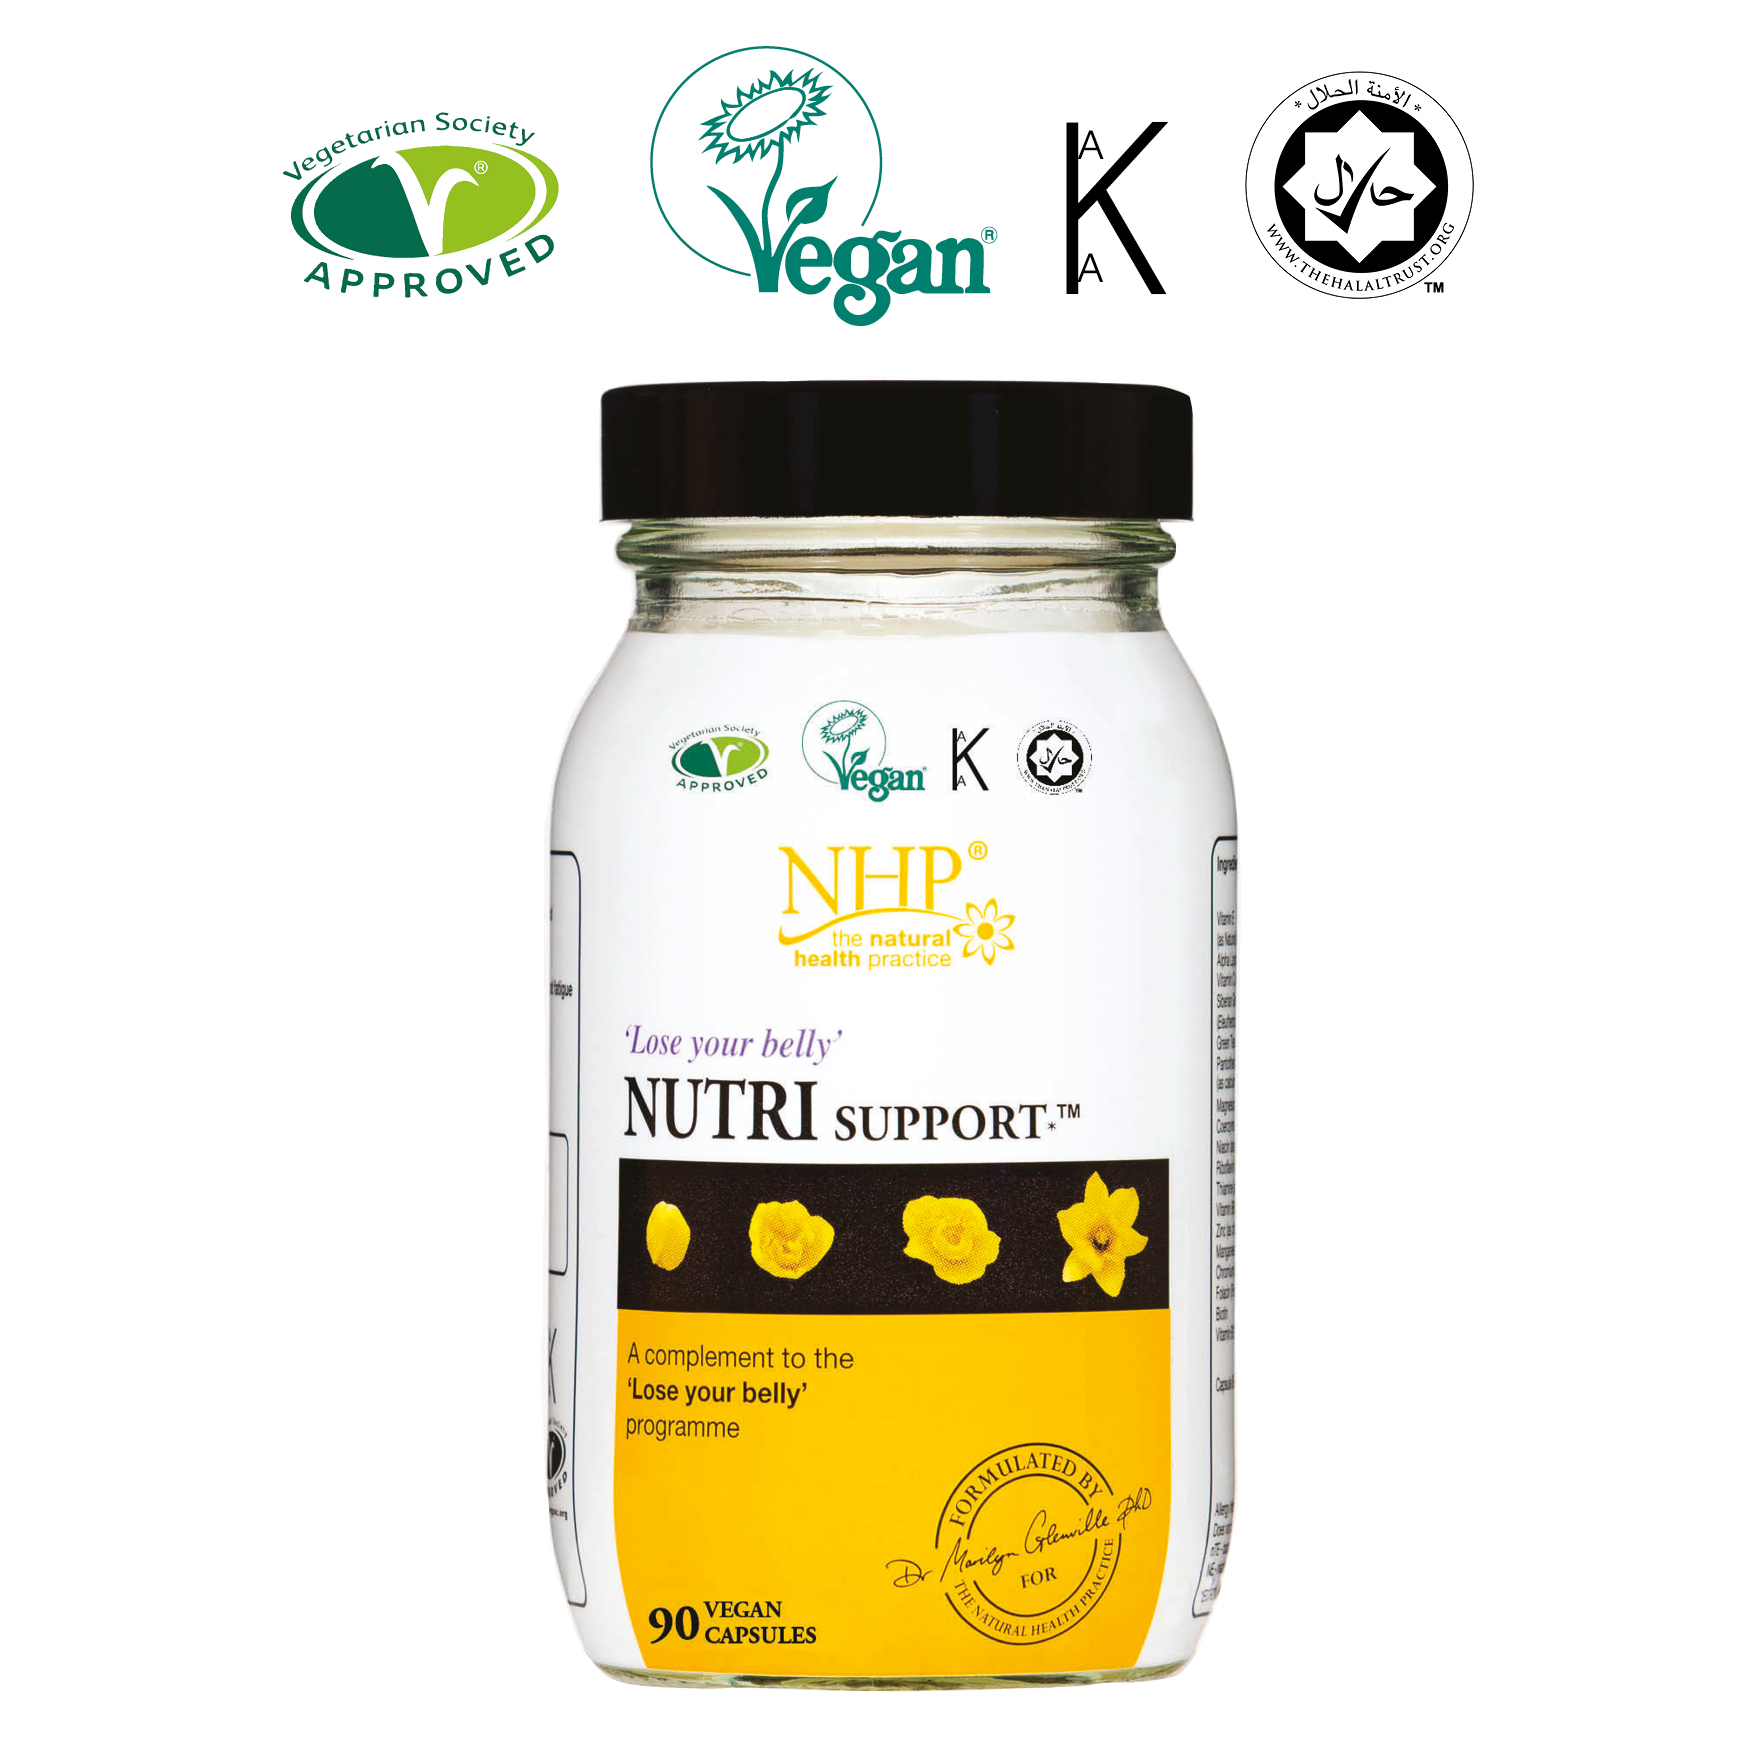 NHP Nutri Support